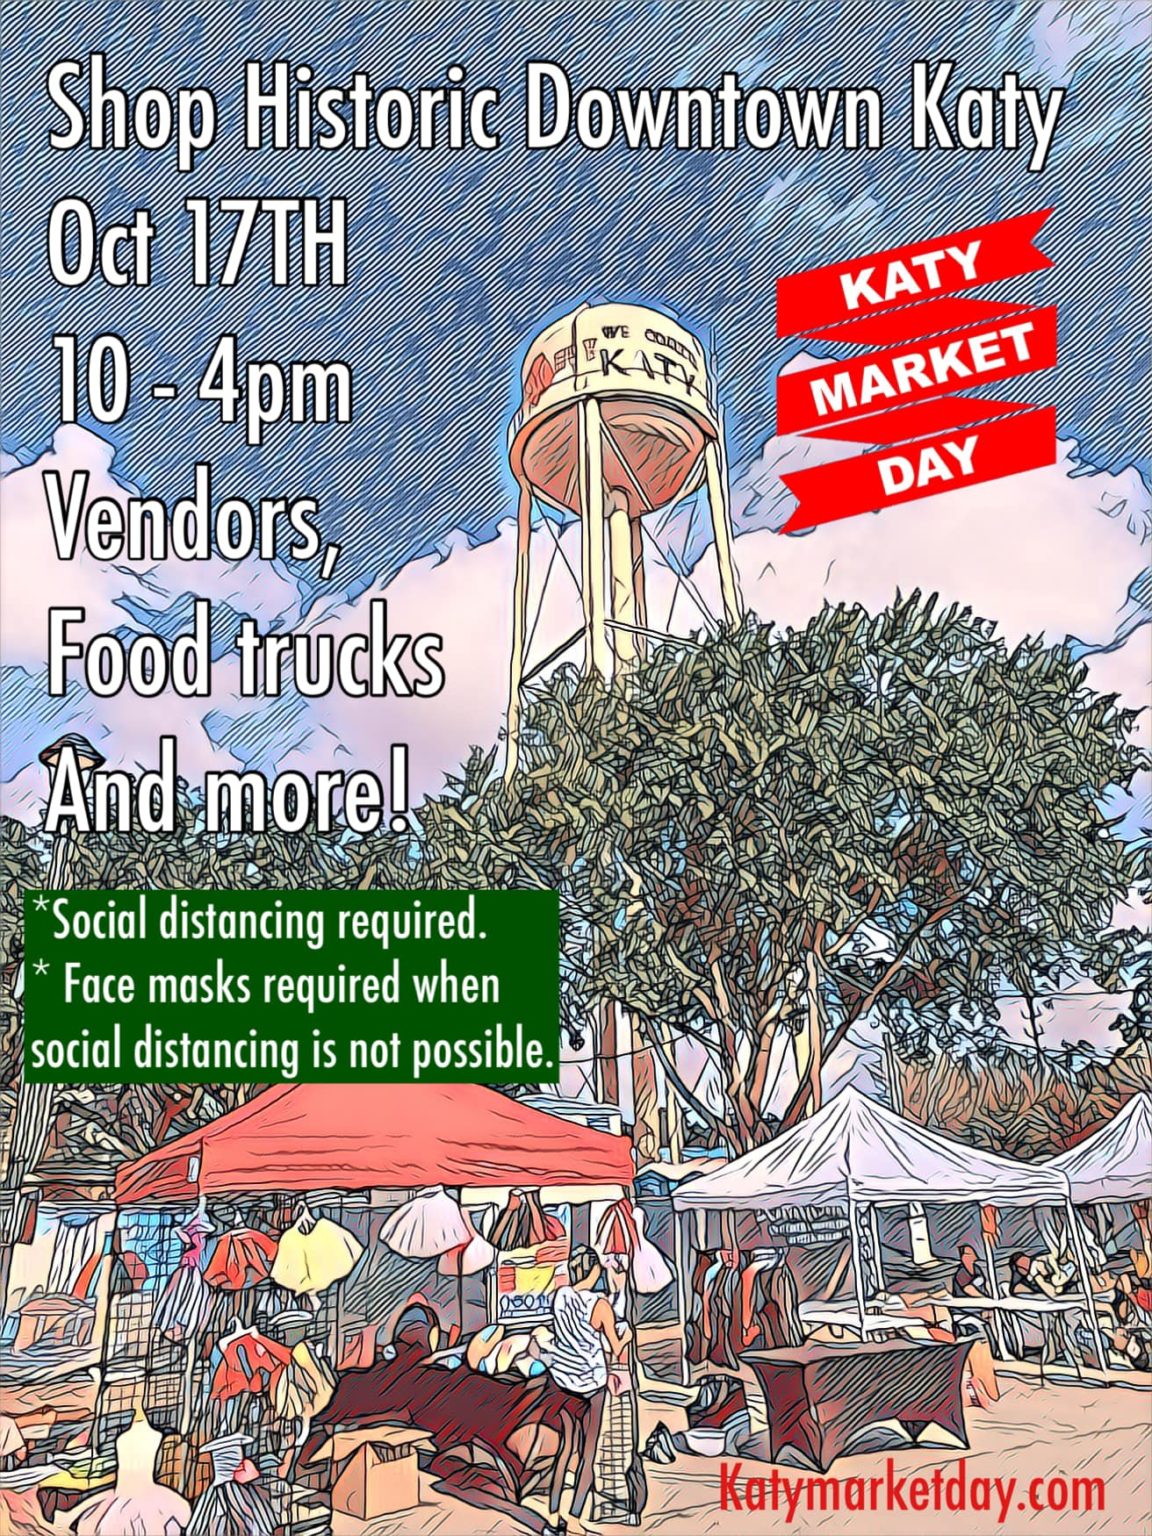 Katy Market Day is BACK for 2020! Katy Market Day